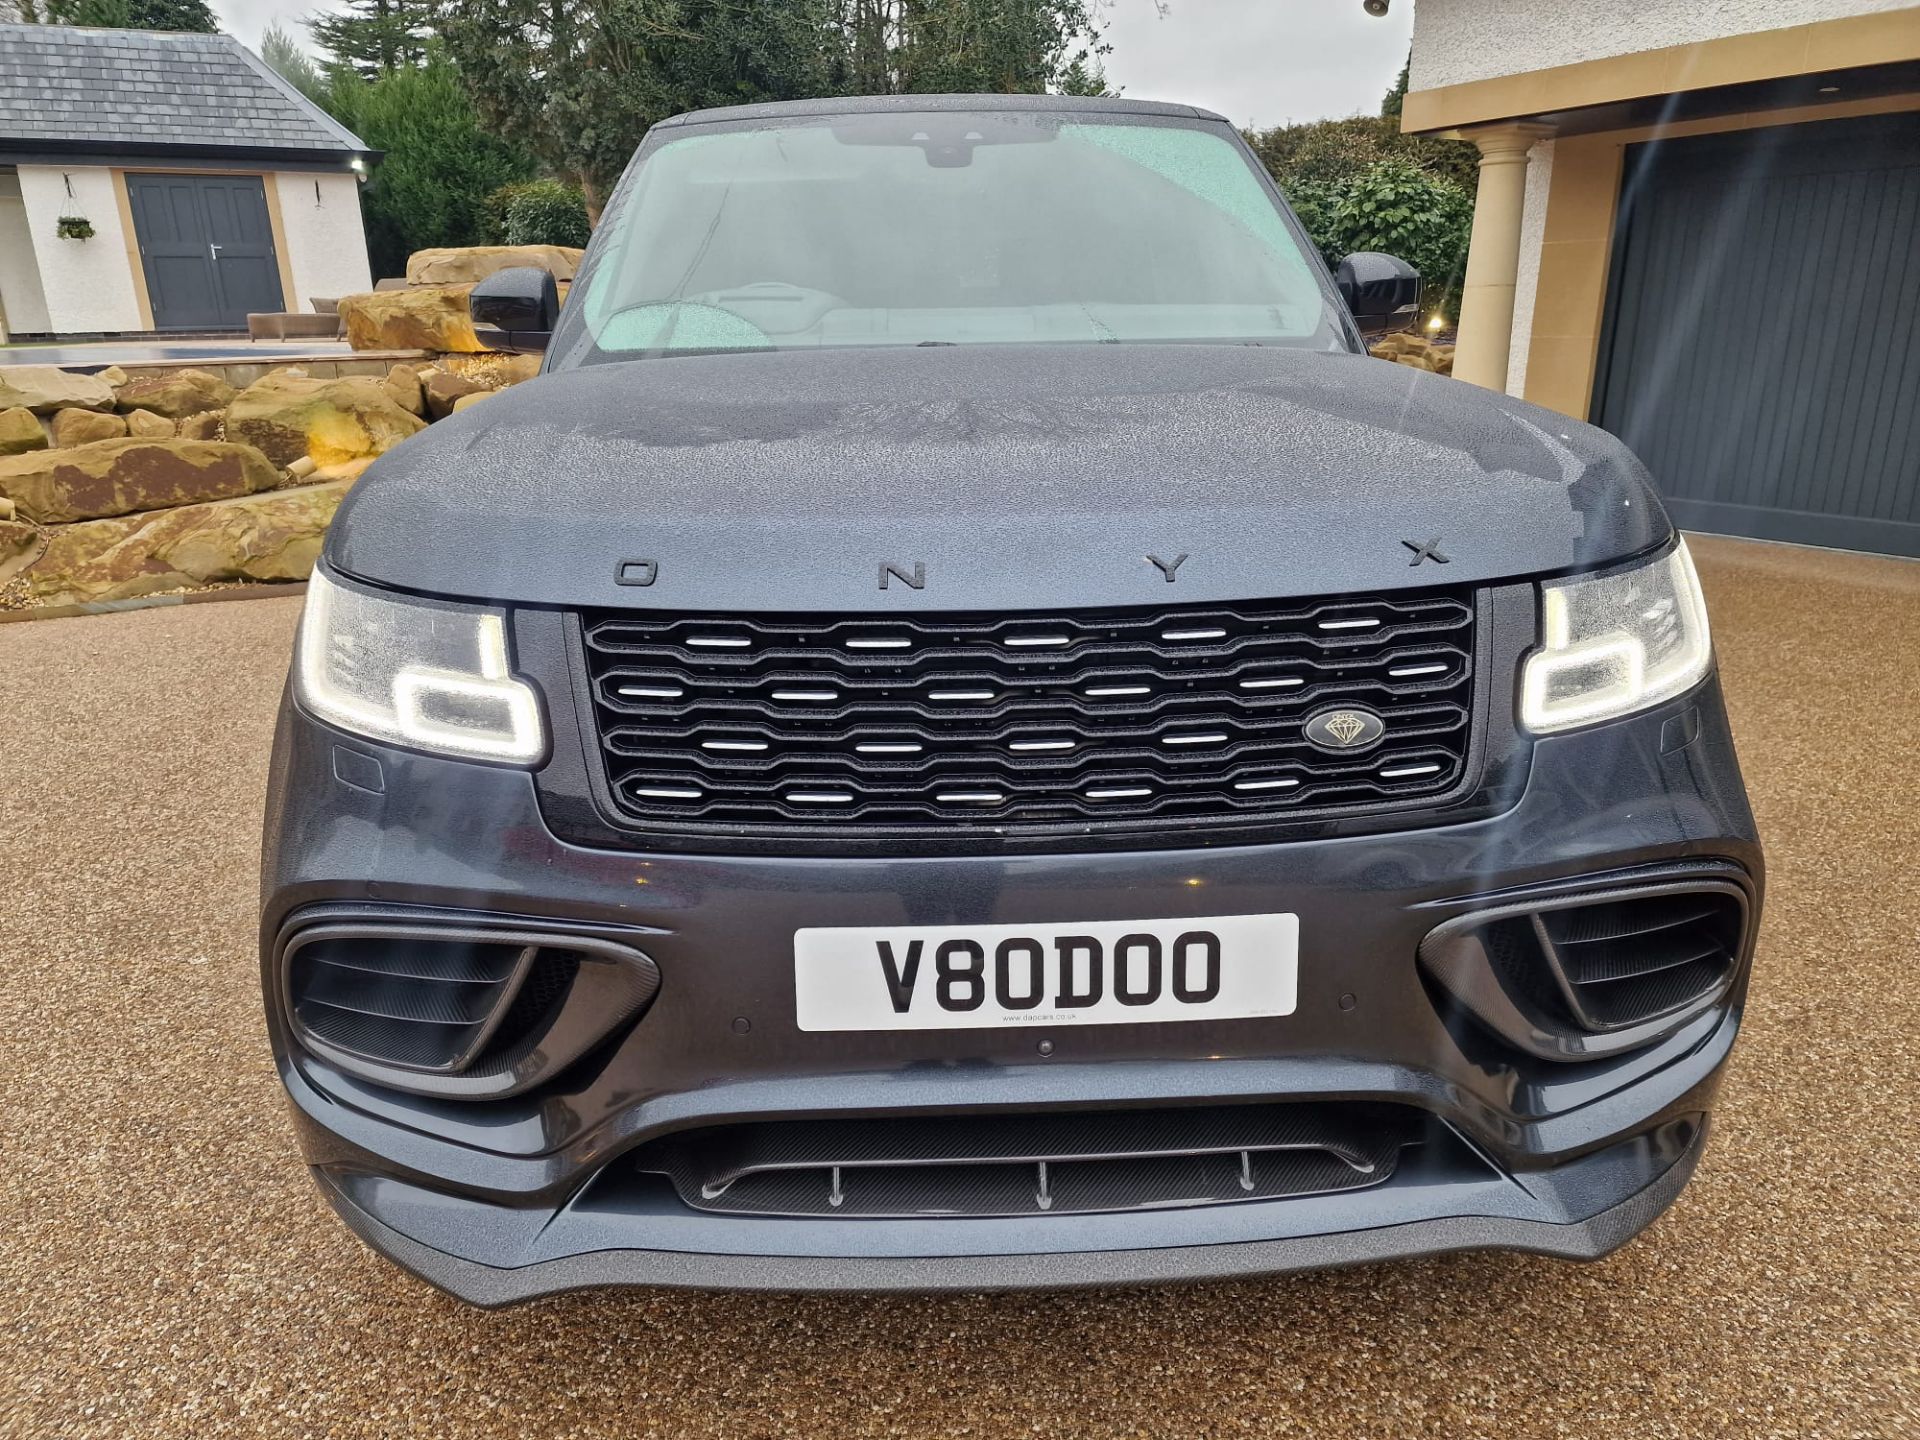 2018/68 RANGE ROVER SV AUTOBIOGRAPHY DYN V8 SC AUTO - £40K WORTH OF ONYX BODY KIT AND CONVERSION - Image 8 of 77